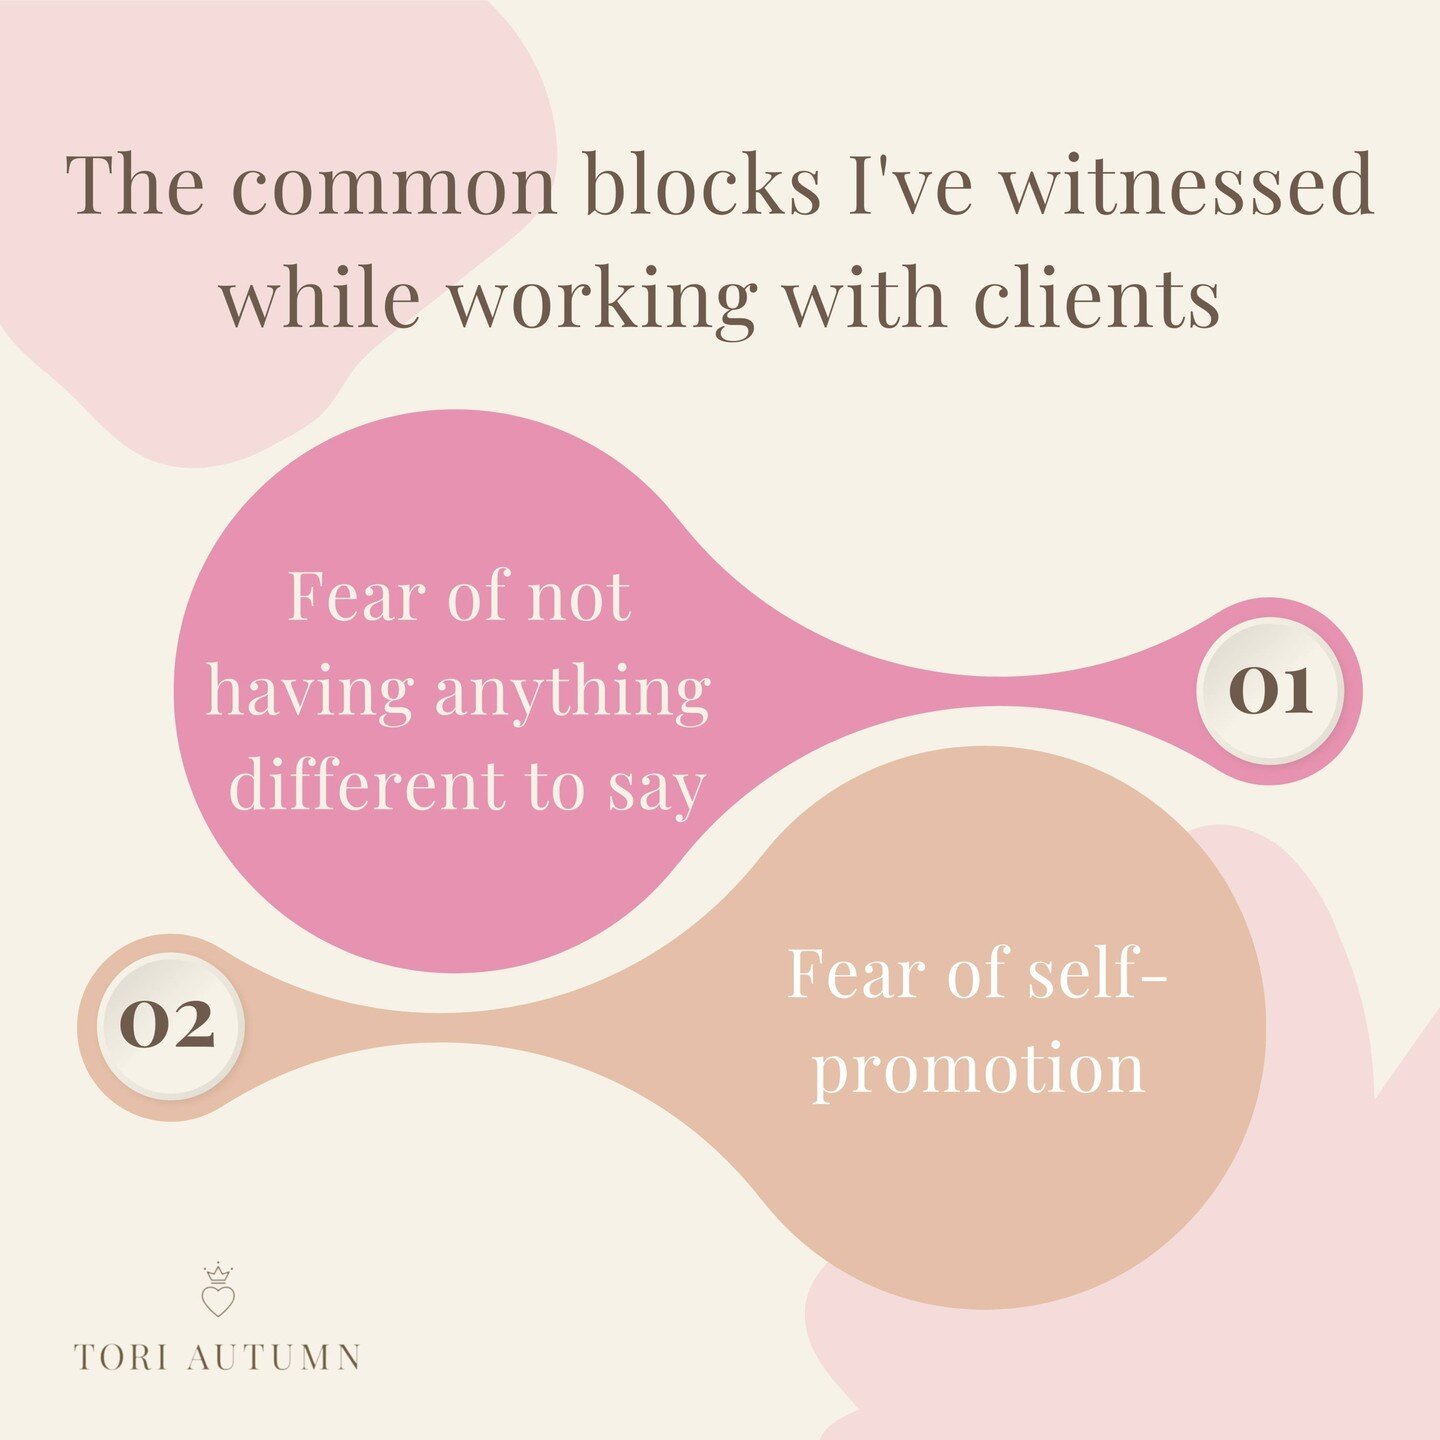 You can&rsquo;t do marketing without visibility.

And there are a lot of blocks to visibility.

Here are some of the common blocks I've witnessed while working with clients👇🏽

1. Fear of not having anything different to say

There is a reason your 